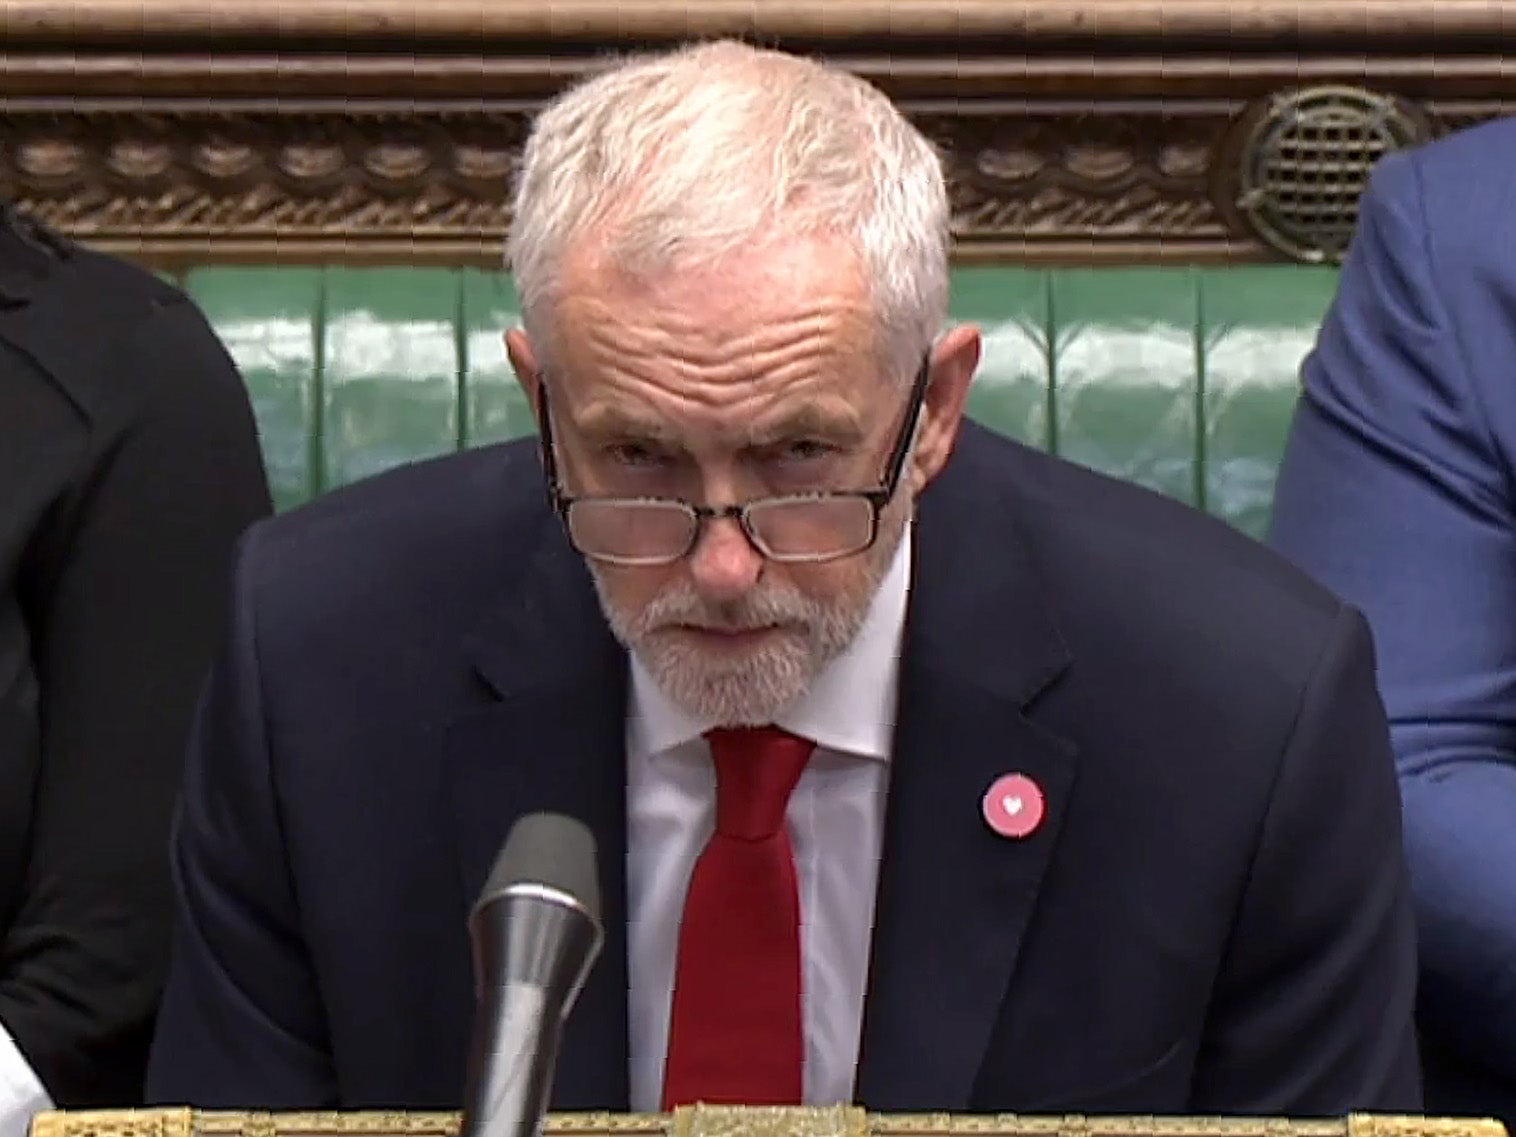 Corbyn ignored Brexit at this week’s PMQs – and not for the first time either